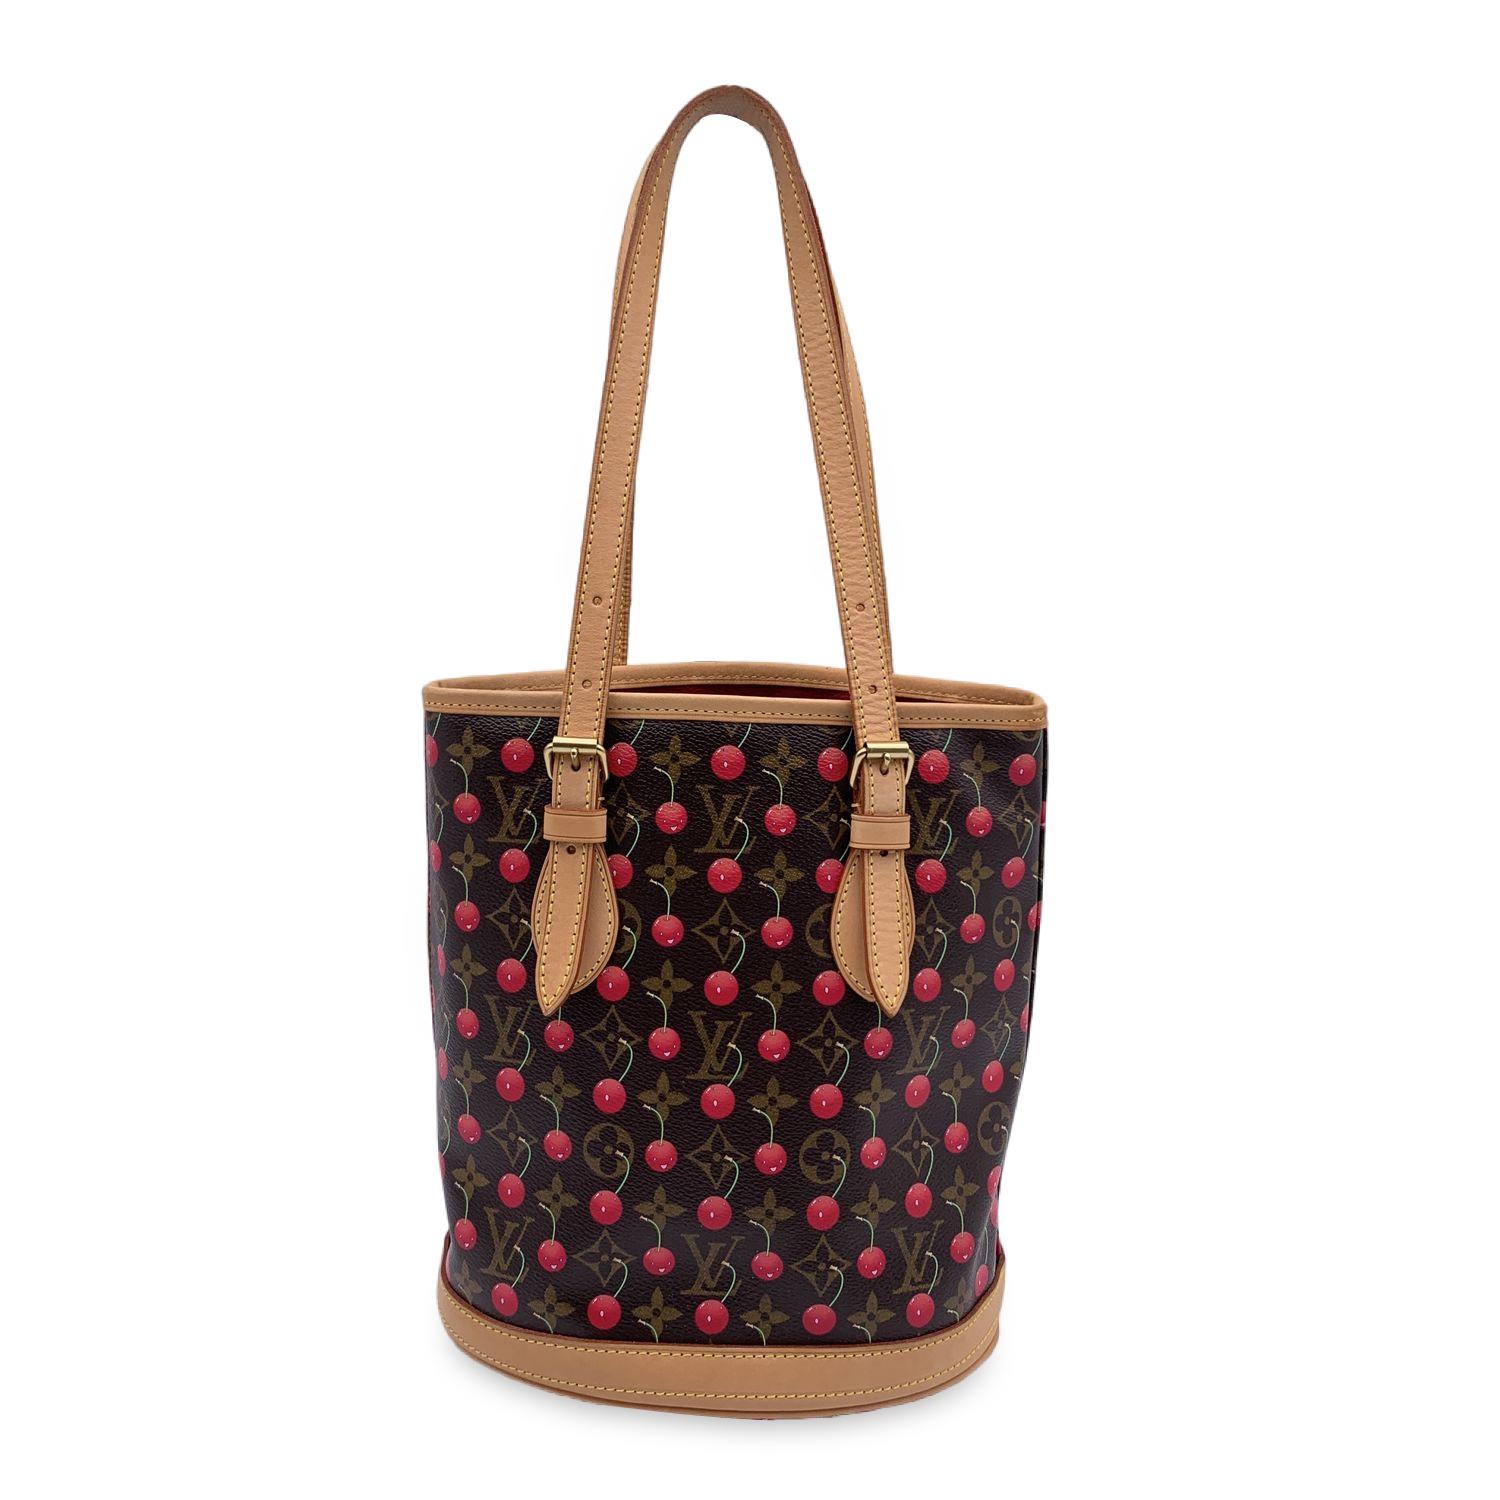 Limited edition LOUIS VUITTON X Takashi Murakami collaboration 'Bucket Bag' tote bag. Period/Era: 2005 - 'Cerises' collection by Takeski Murakami. Brown monogram coated canvas with bright cheerful cherry print. Rounded shape and open top. Double